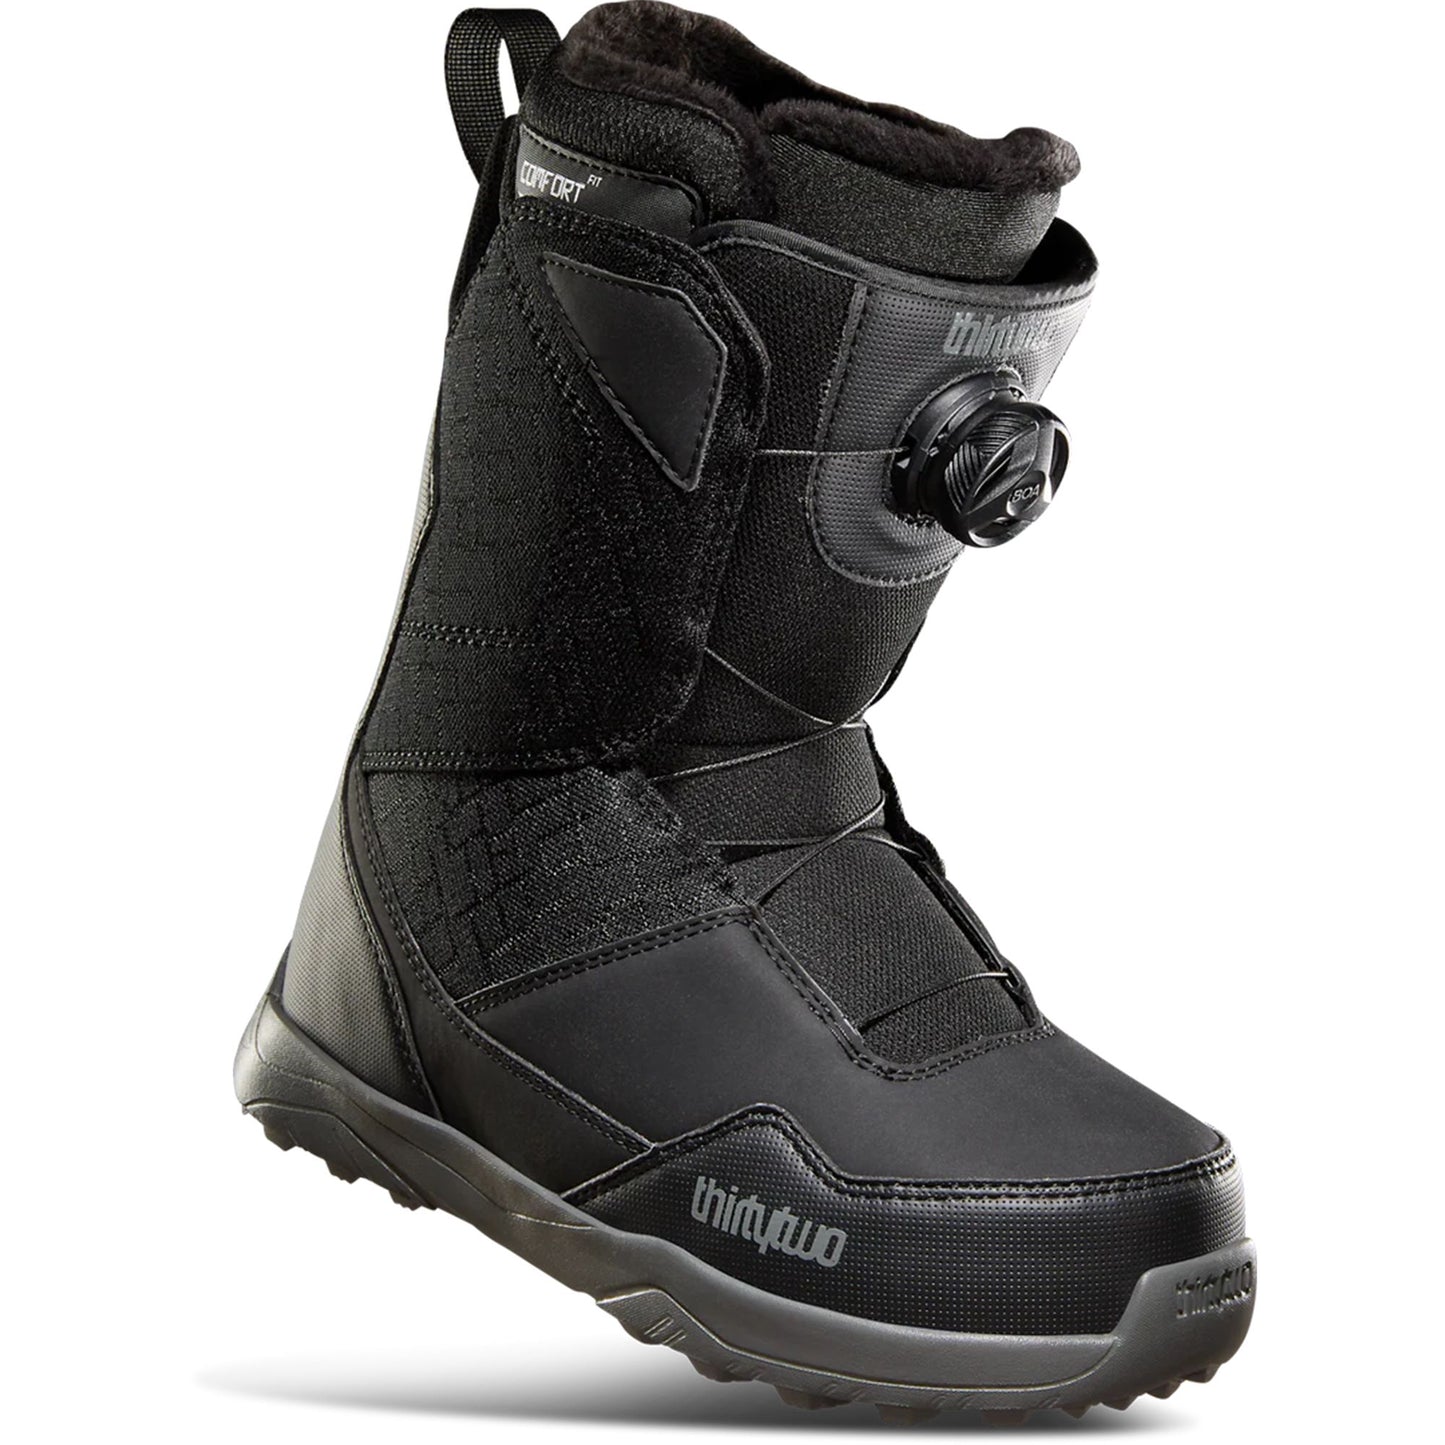 ThirtyTwo Women's Shifty BOA Snowboard Boots Black Snowboard Boots